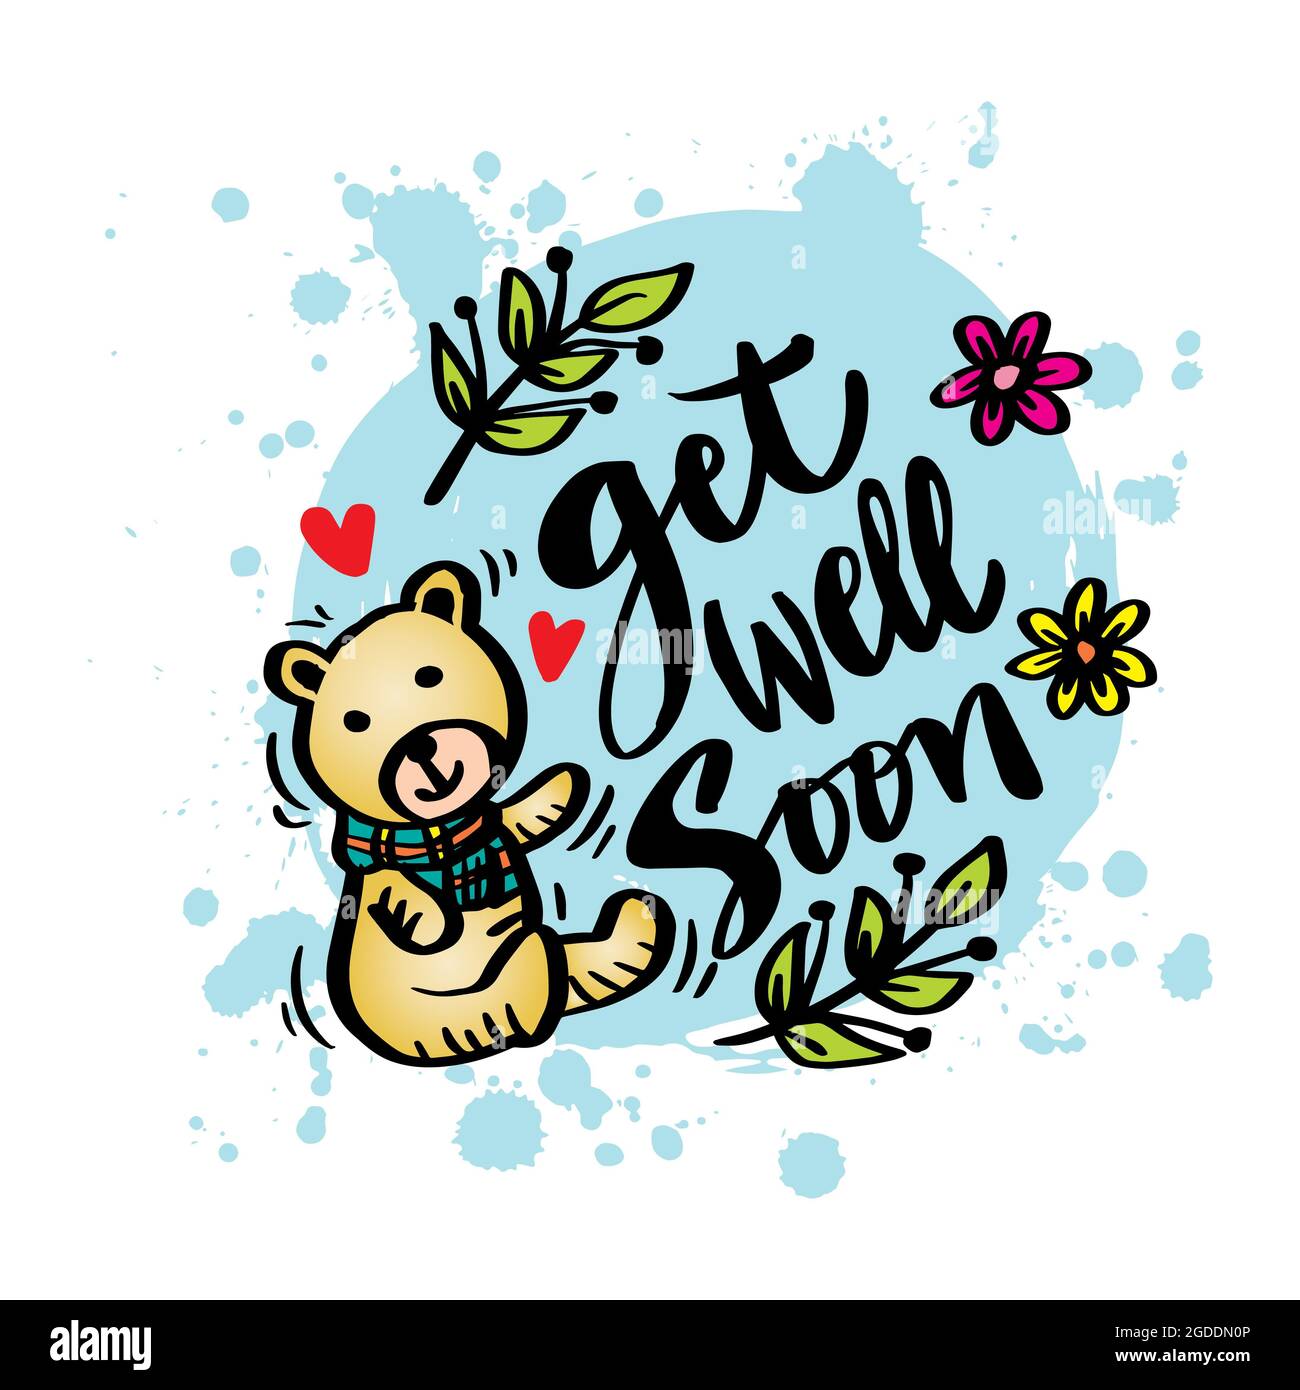 Get well soon hand lettering with cute bear. Motivational quote. Stock Photo